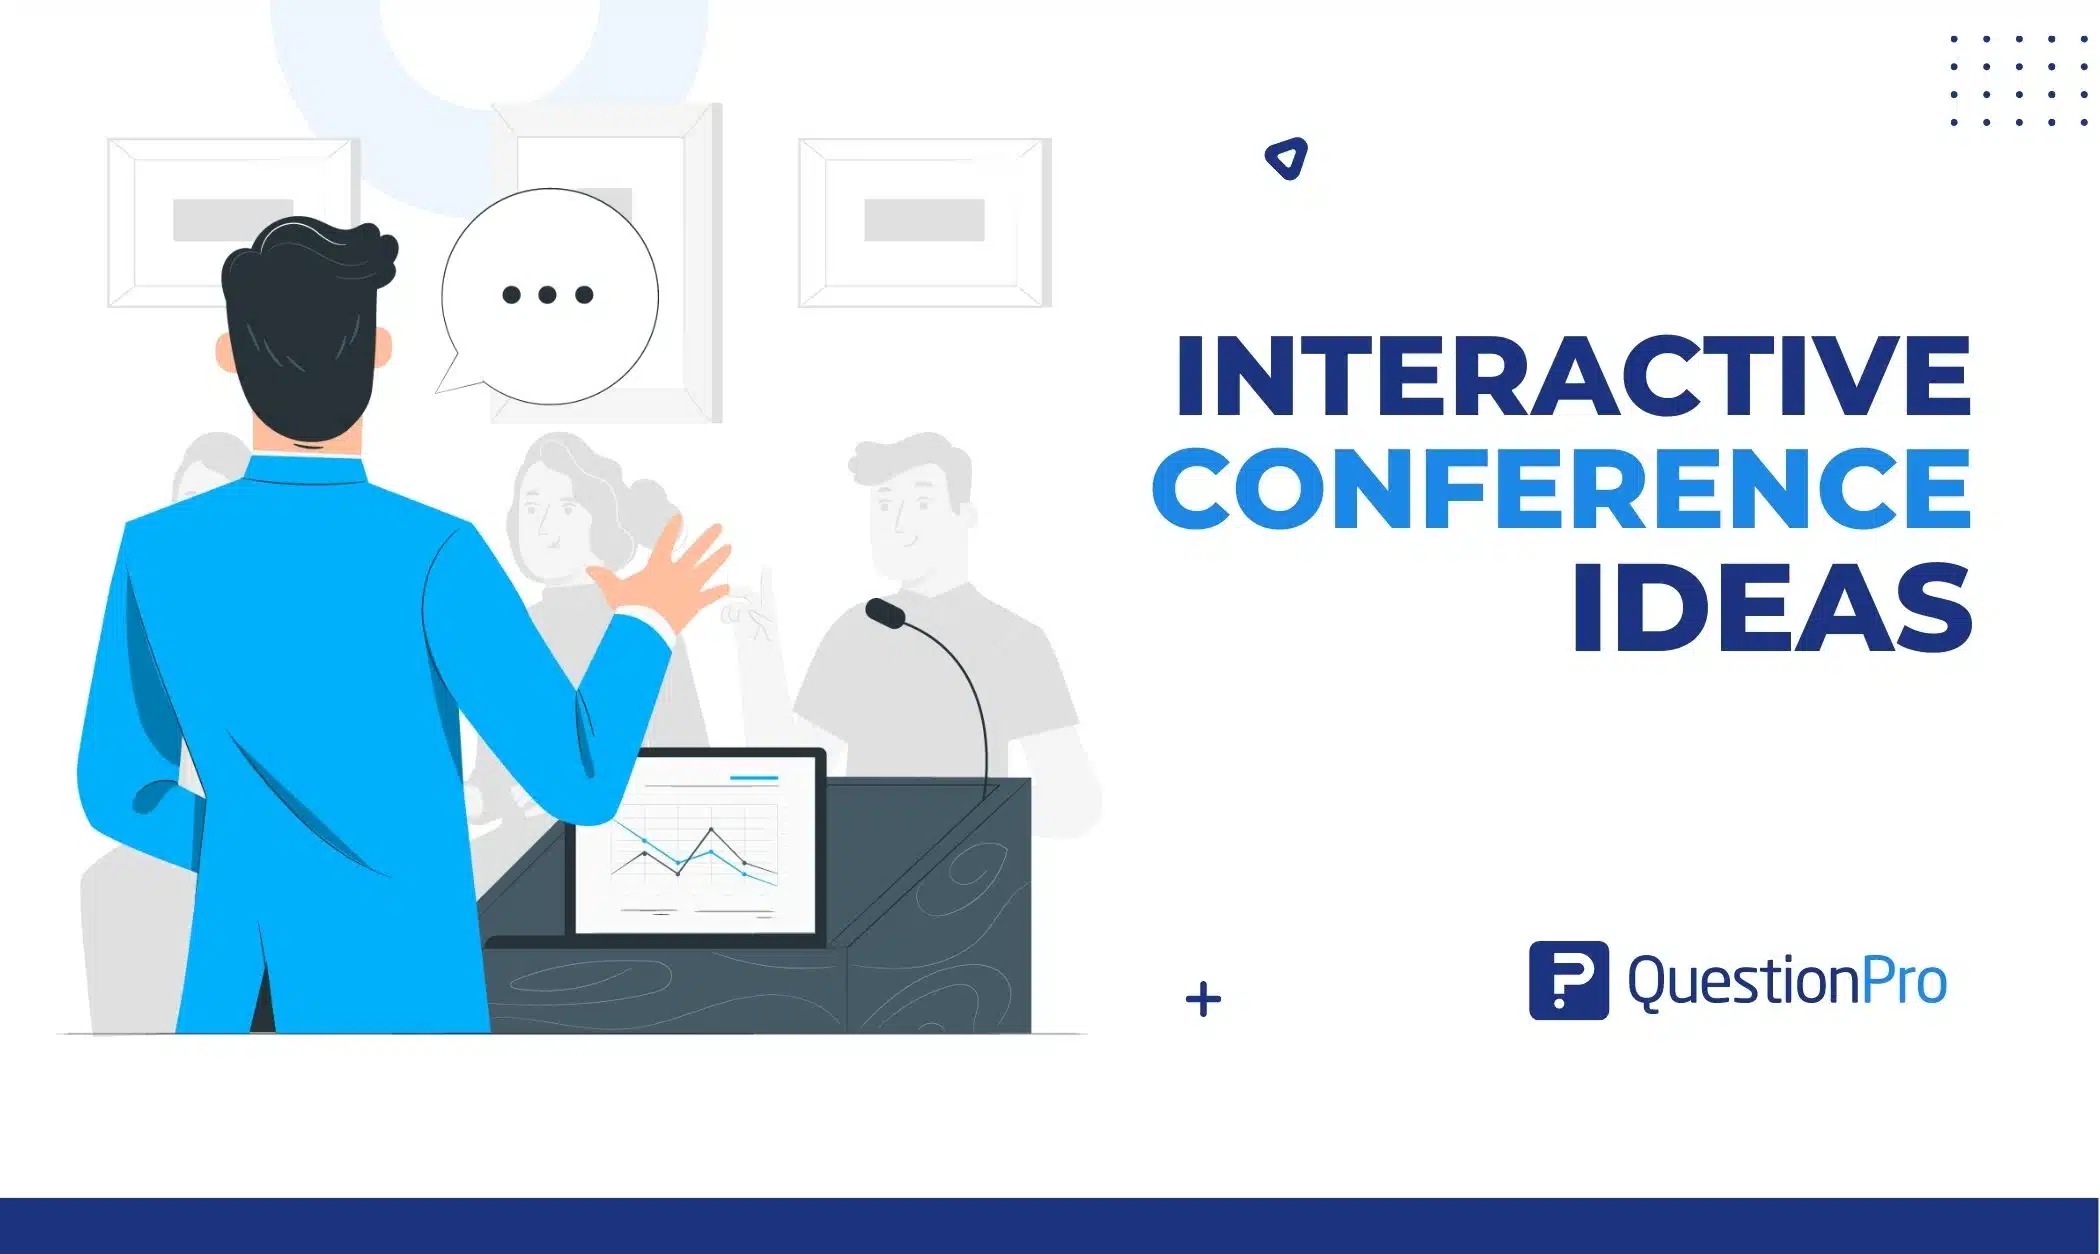 Using the right interactive conference ideas will make your event more engaging and effective. Polls, quizzes + more can be interactive now.